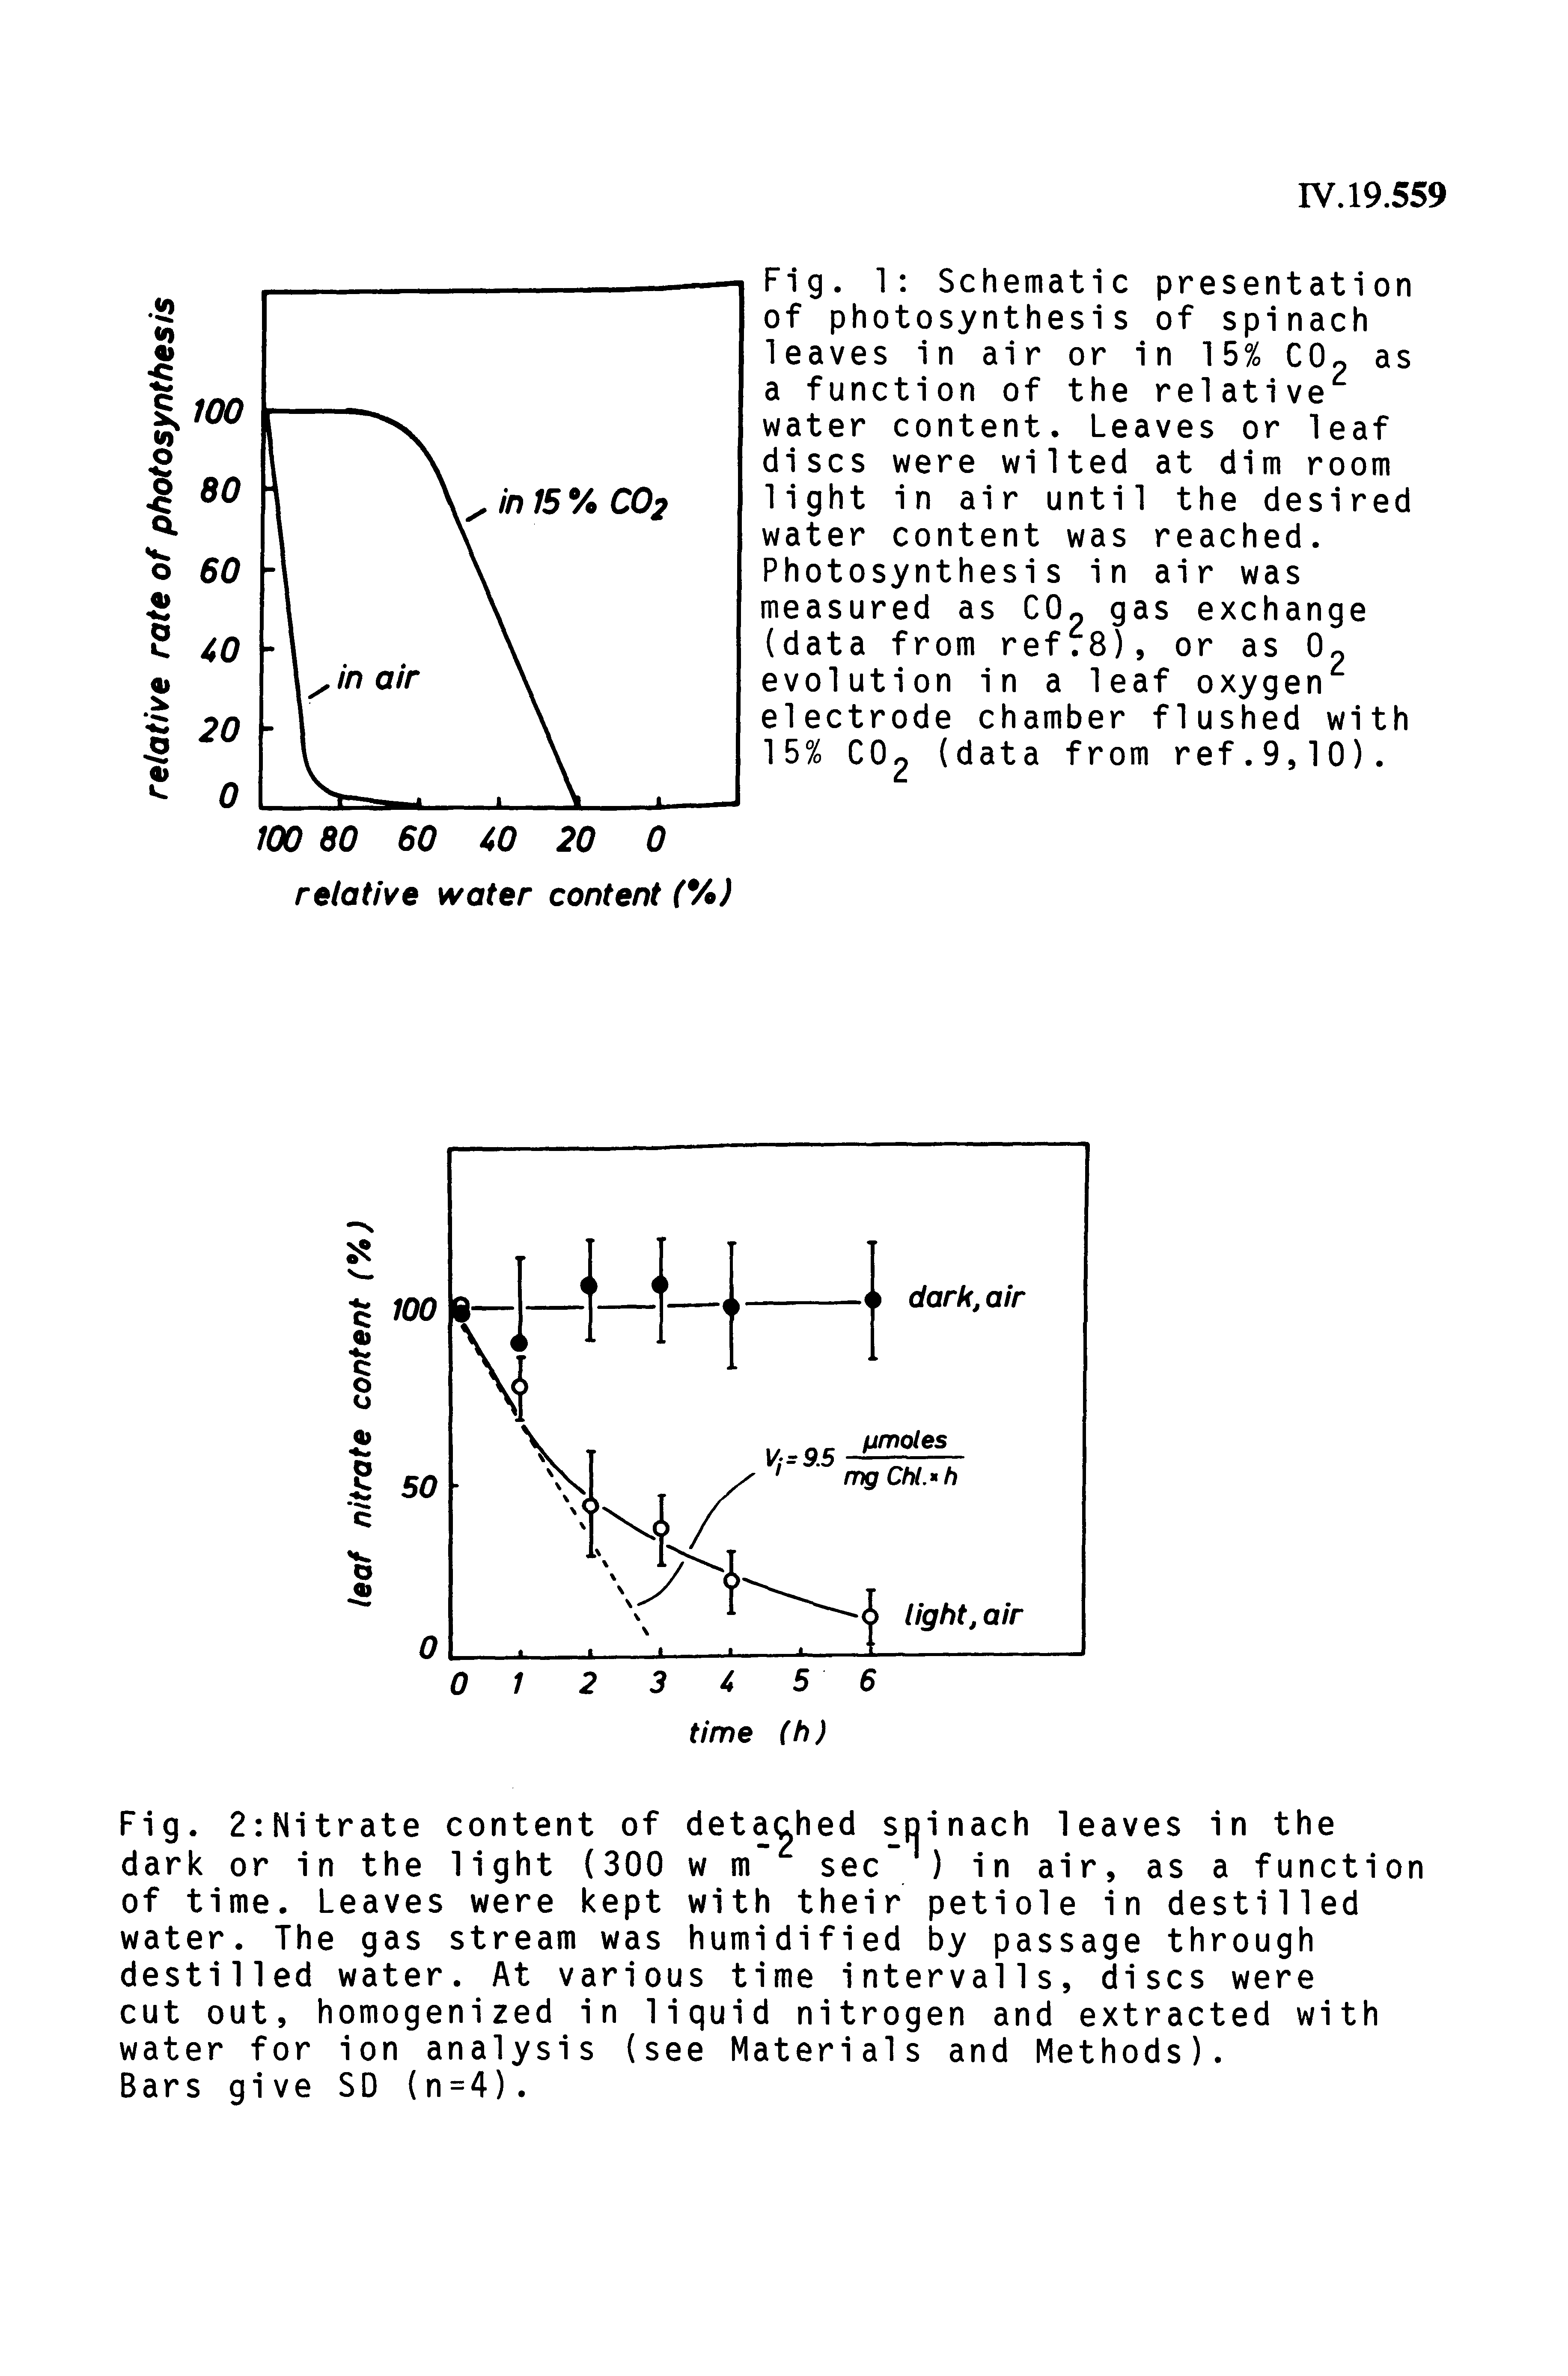 Fig. 1 Schematic presentation of photosynthesis of spinach leaves in air or in 155 CO as a function of the relative water content. Leaves or leaf discs were wilted at dim room light in air until the desired water content was reached. Photosynthesis in air was measured as C0 gas exchange (data from ref78), or as Op evolution in a leaf oxygen electrode chamber flushed with 15% CO2 (data from ref.9,10).